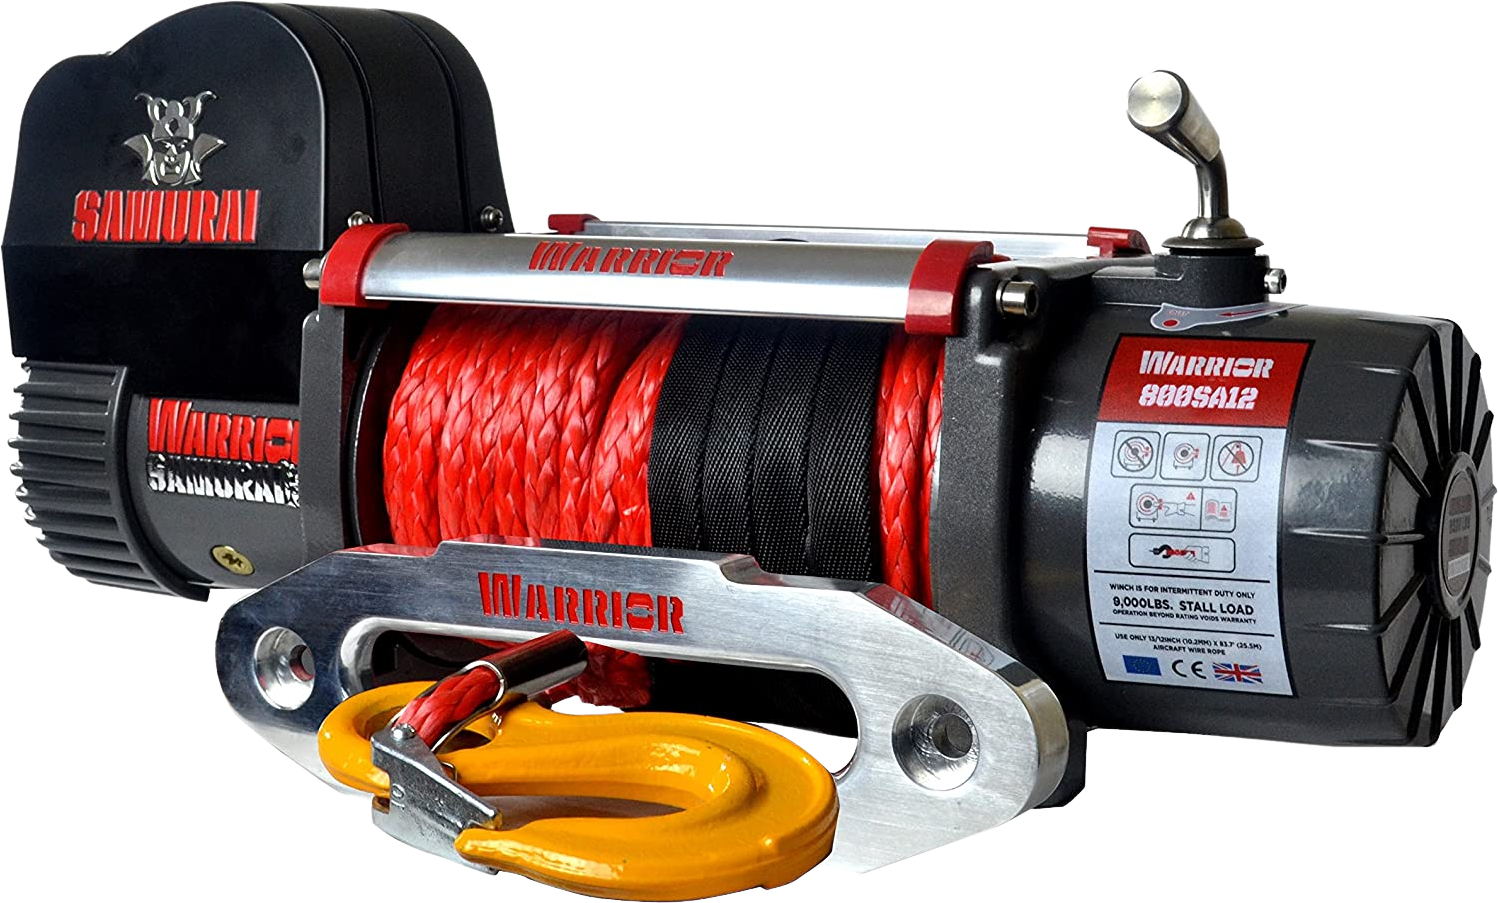 DK2, DK2 8000-SR 8,000 lbs. Capacity Warrior Spartan Electric Synthetic Winch New